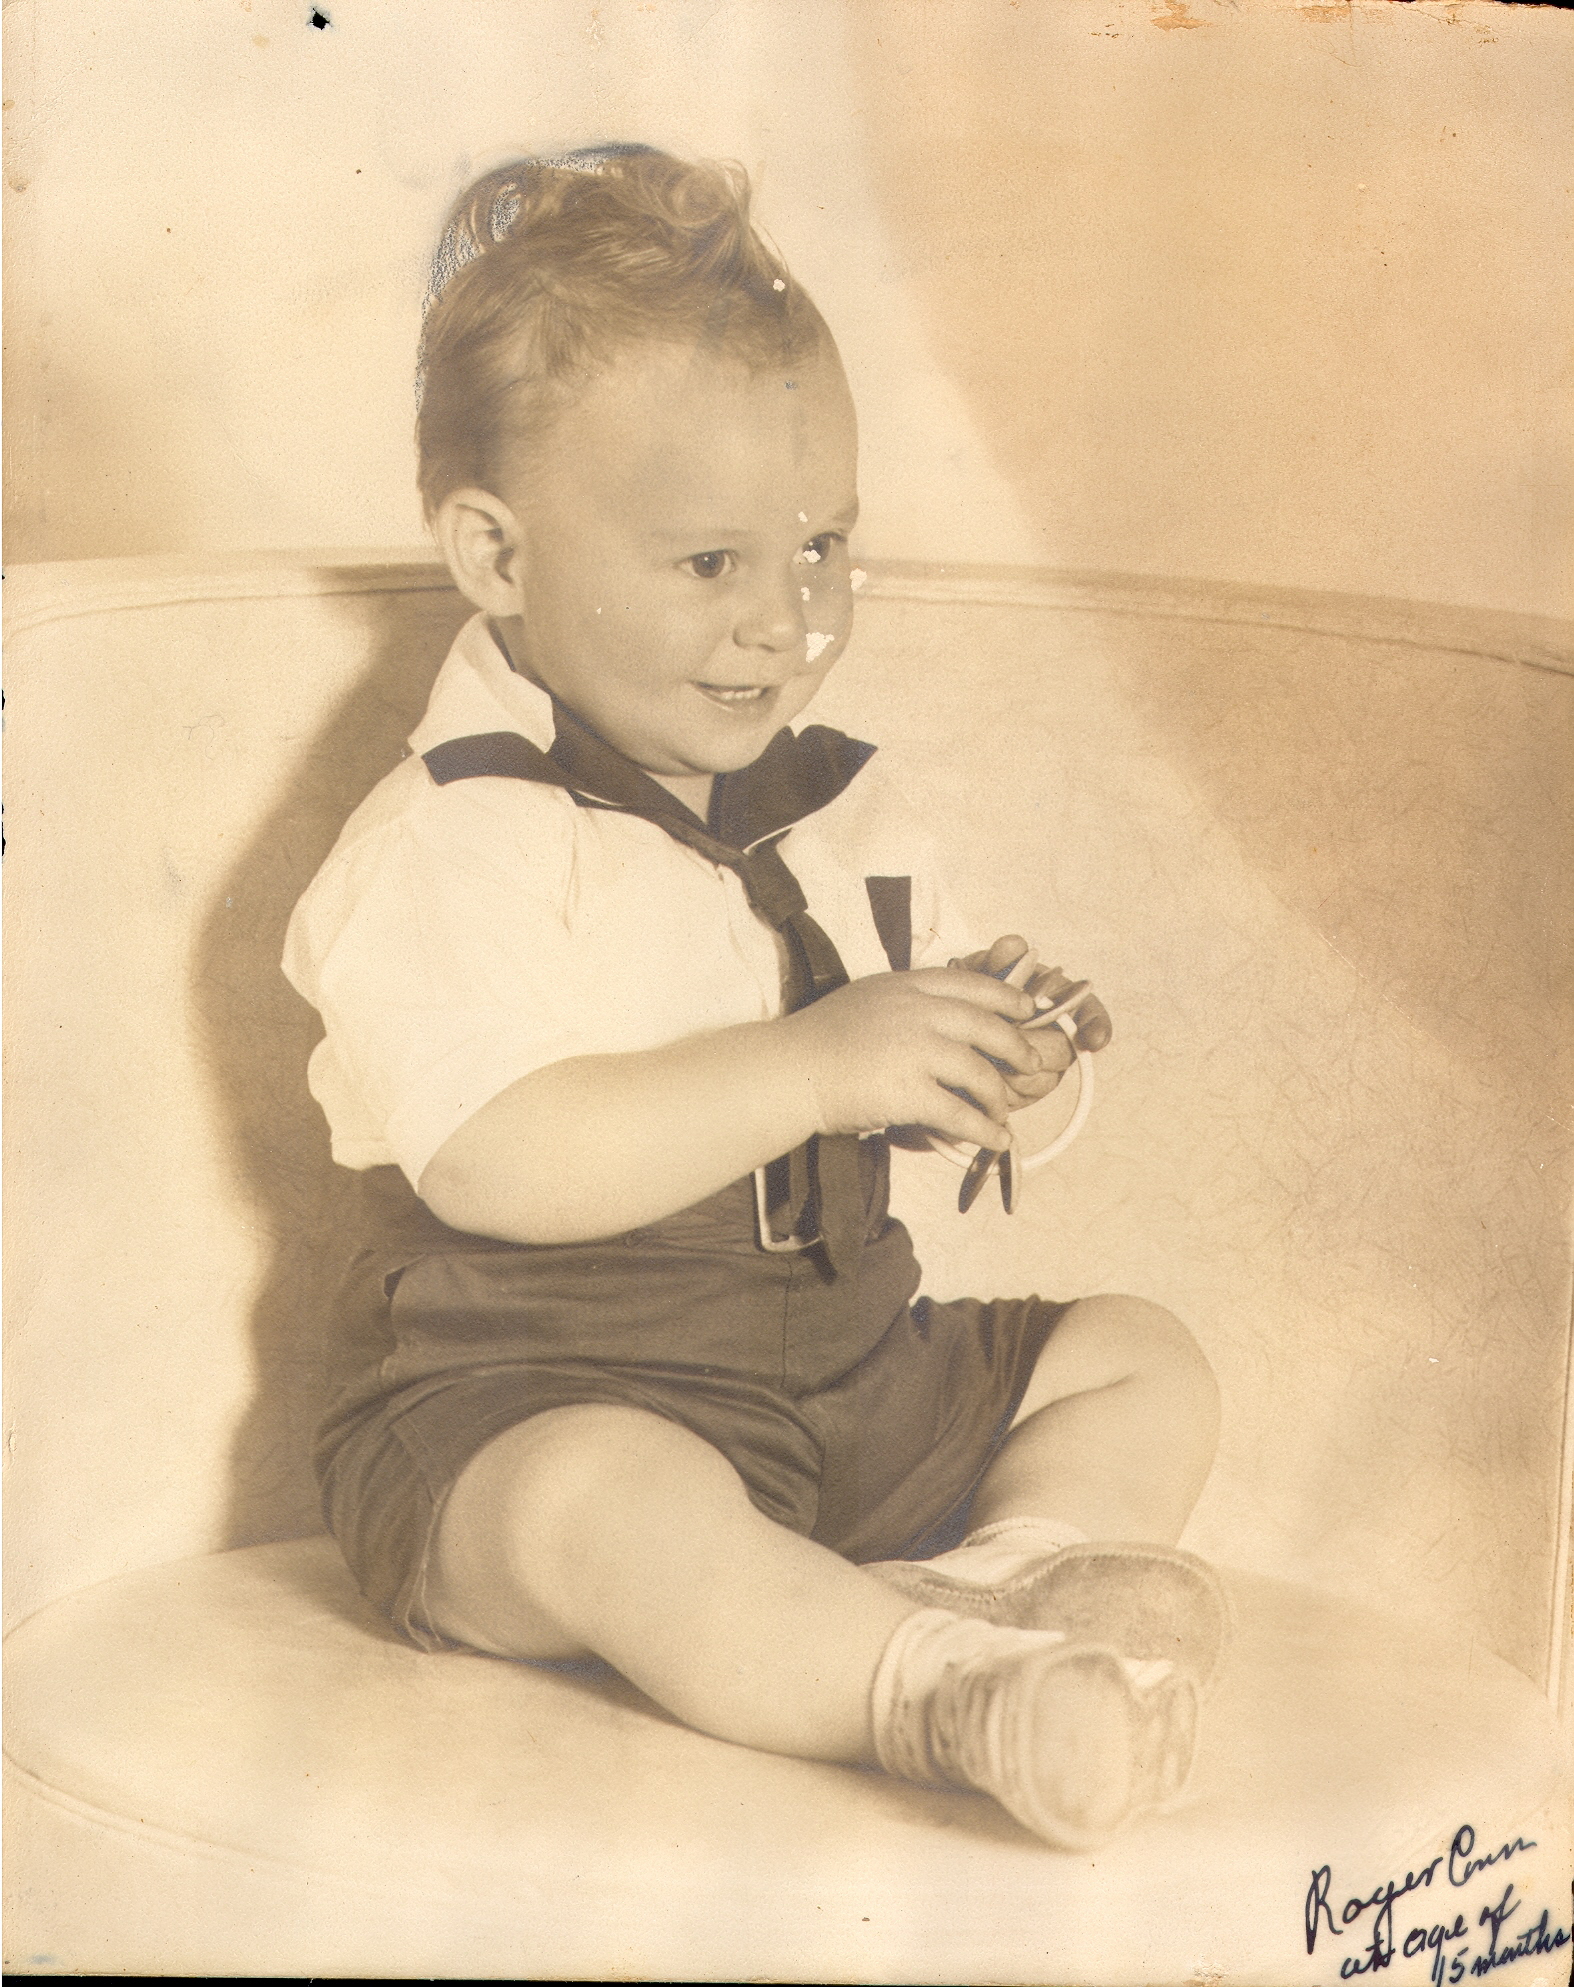 Roger Conn as a baby in 1942